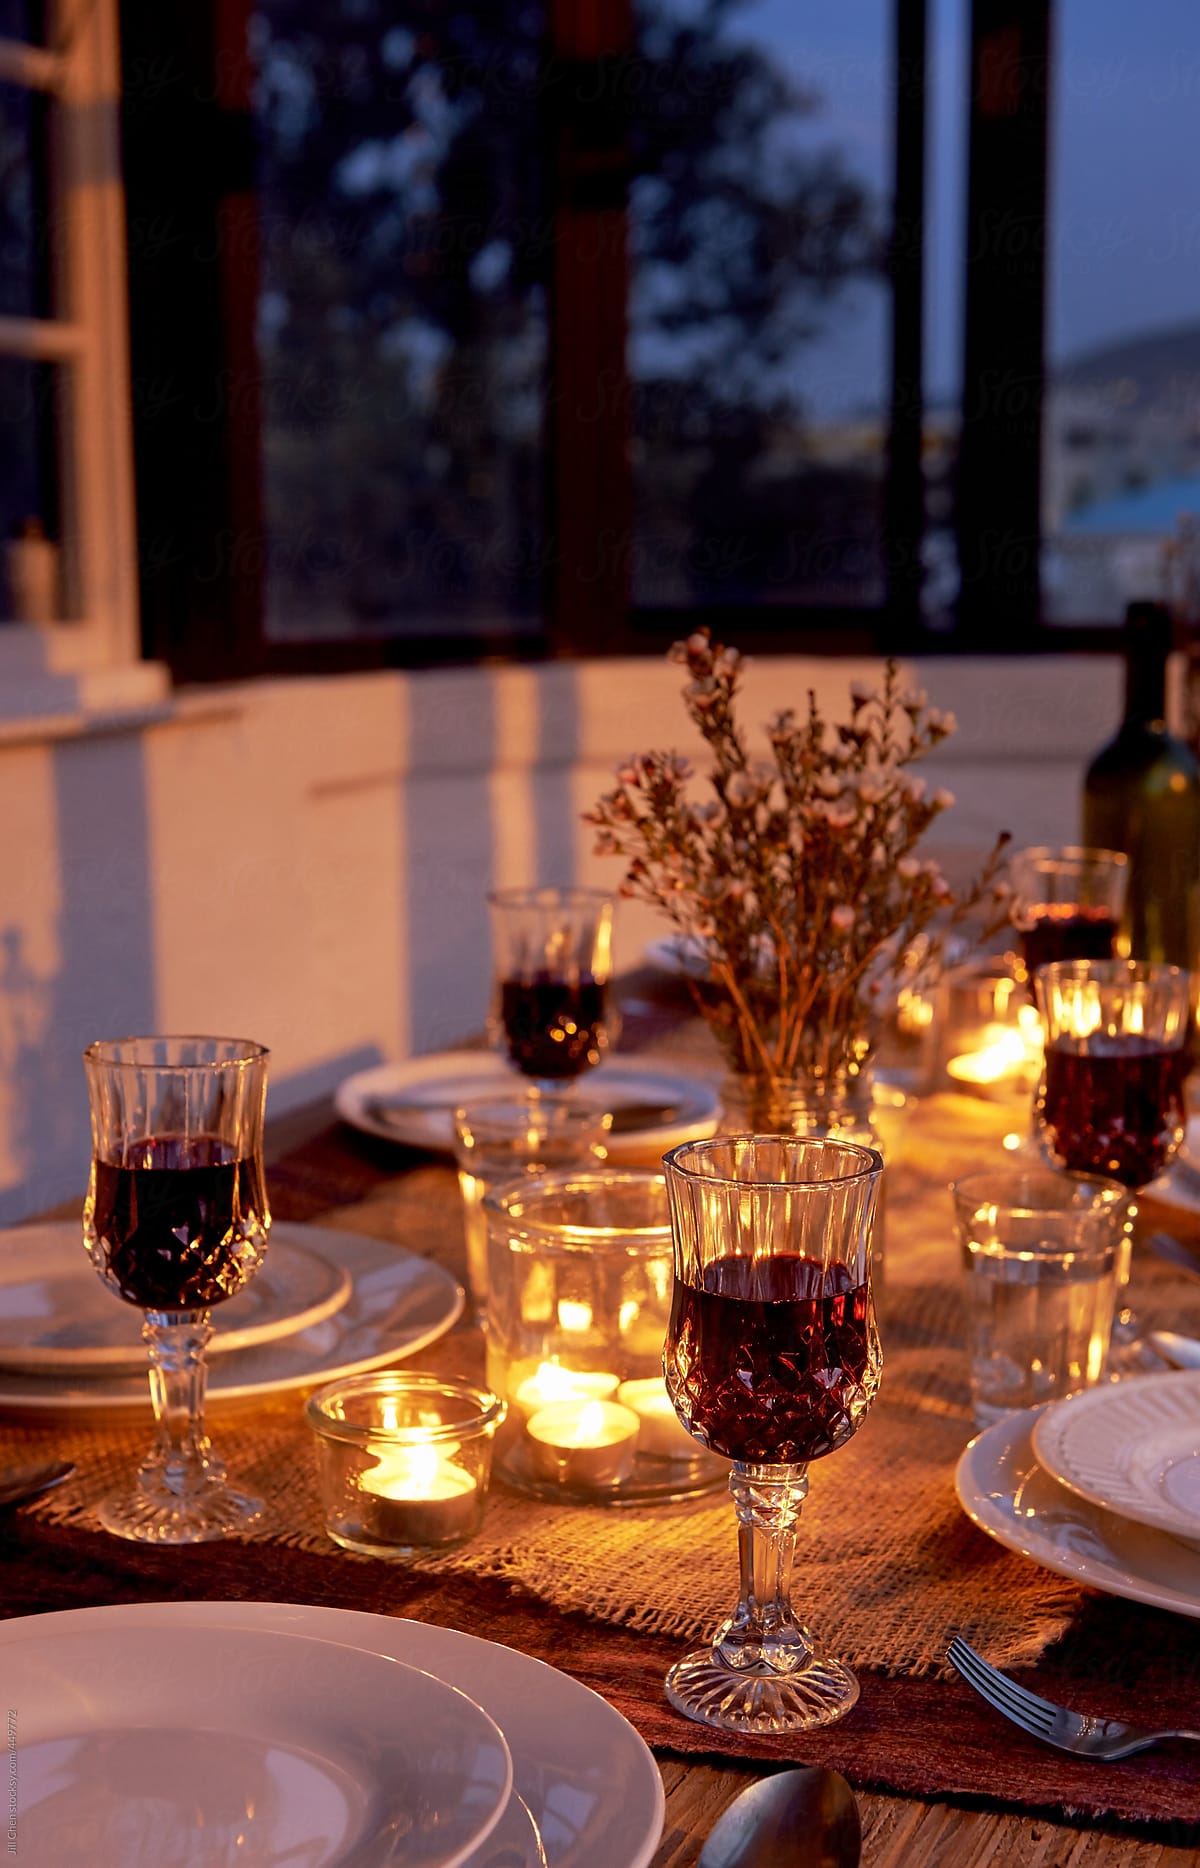 Dinner party table setting